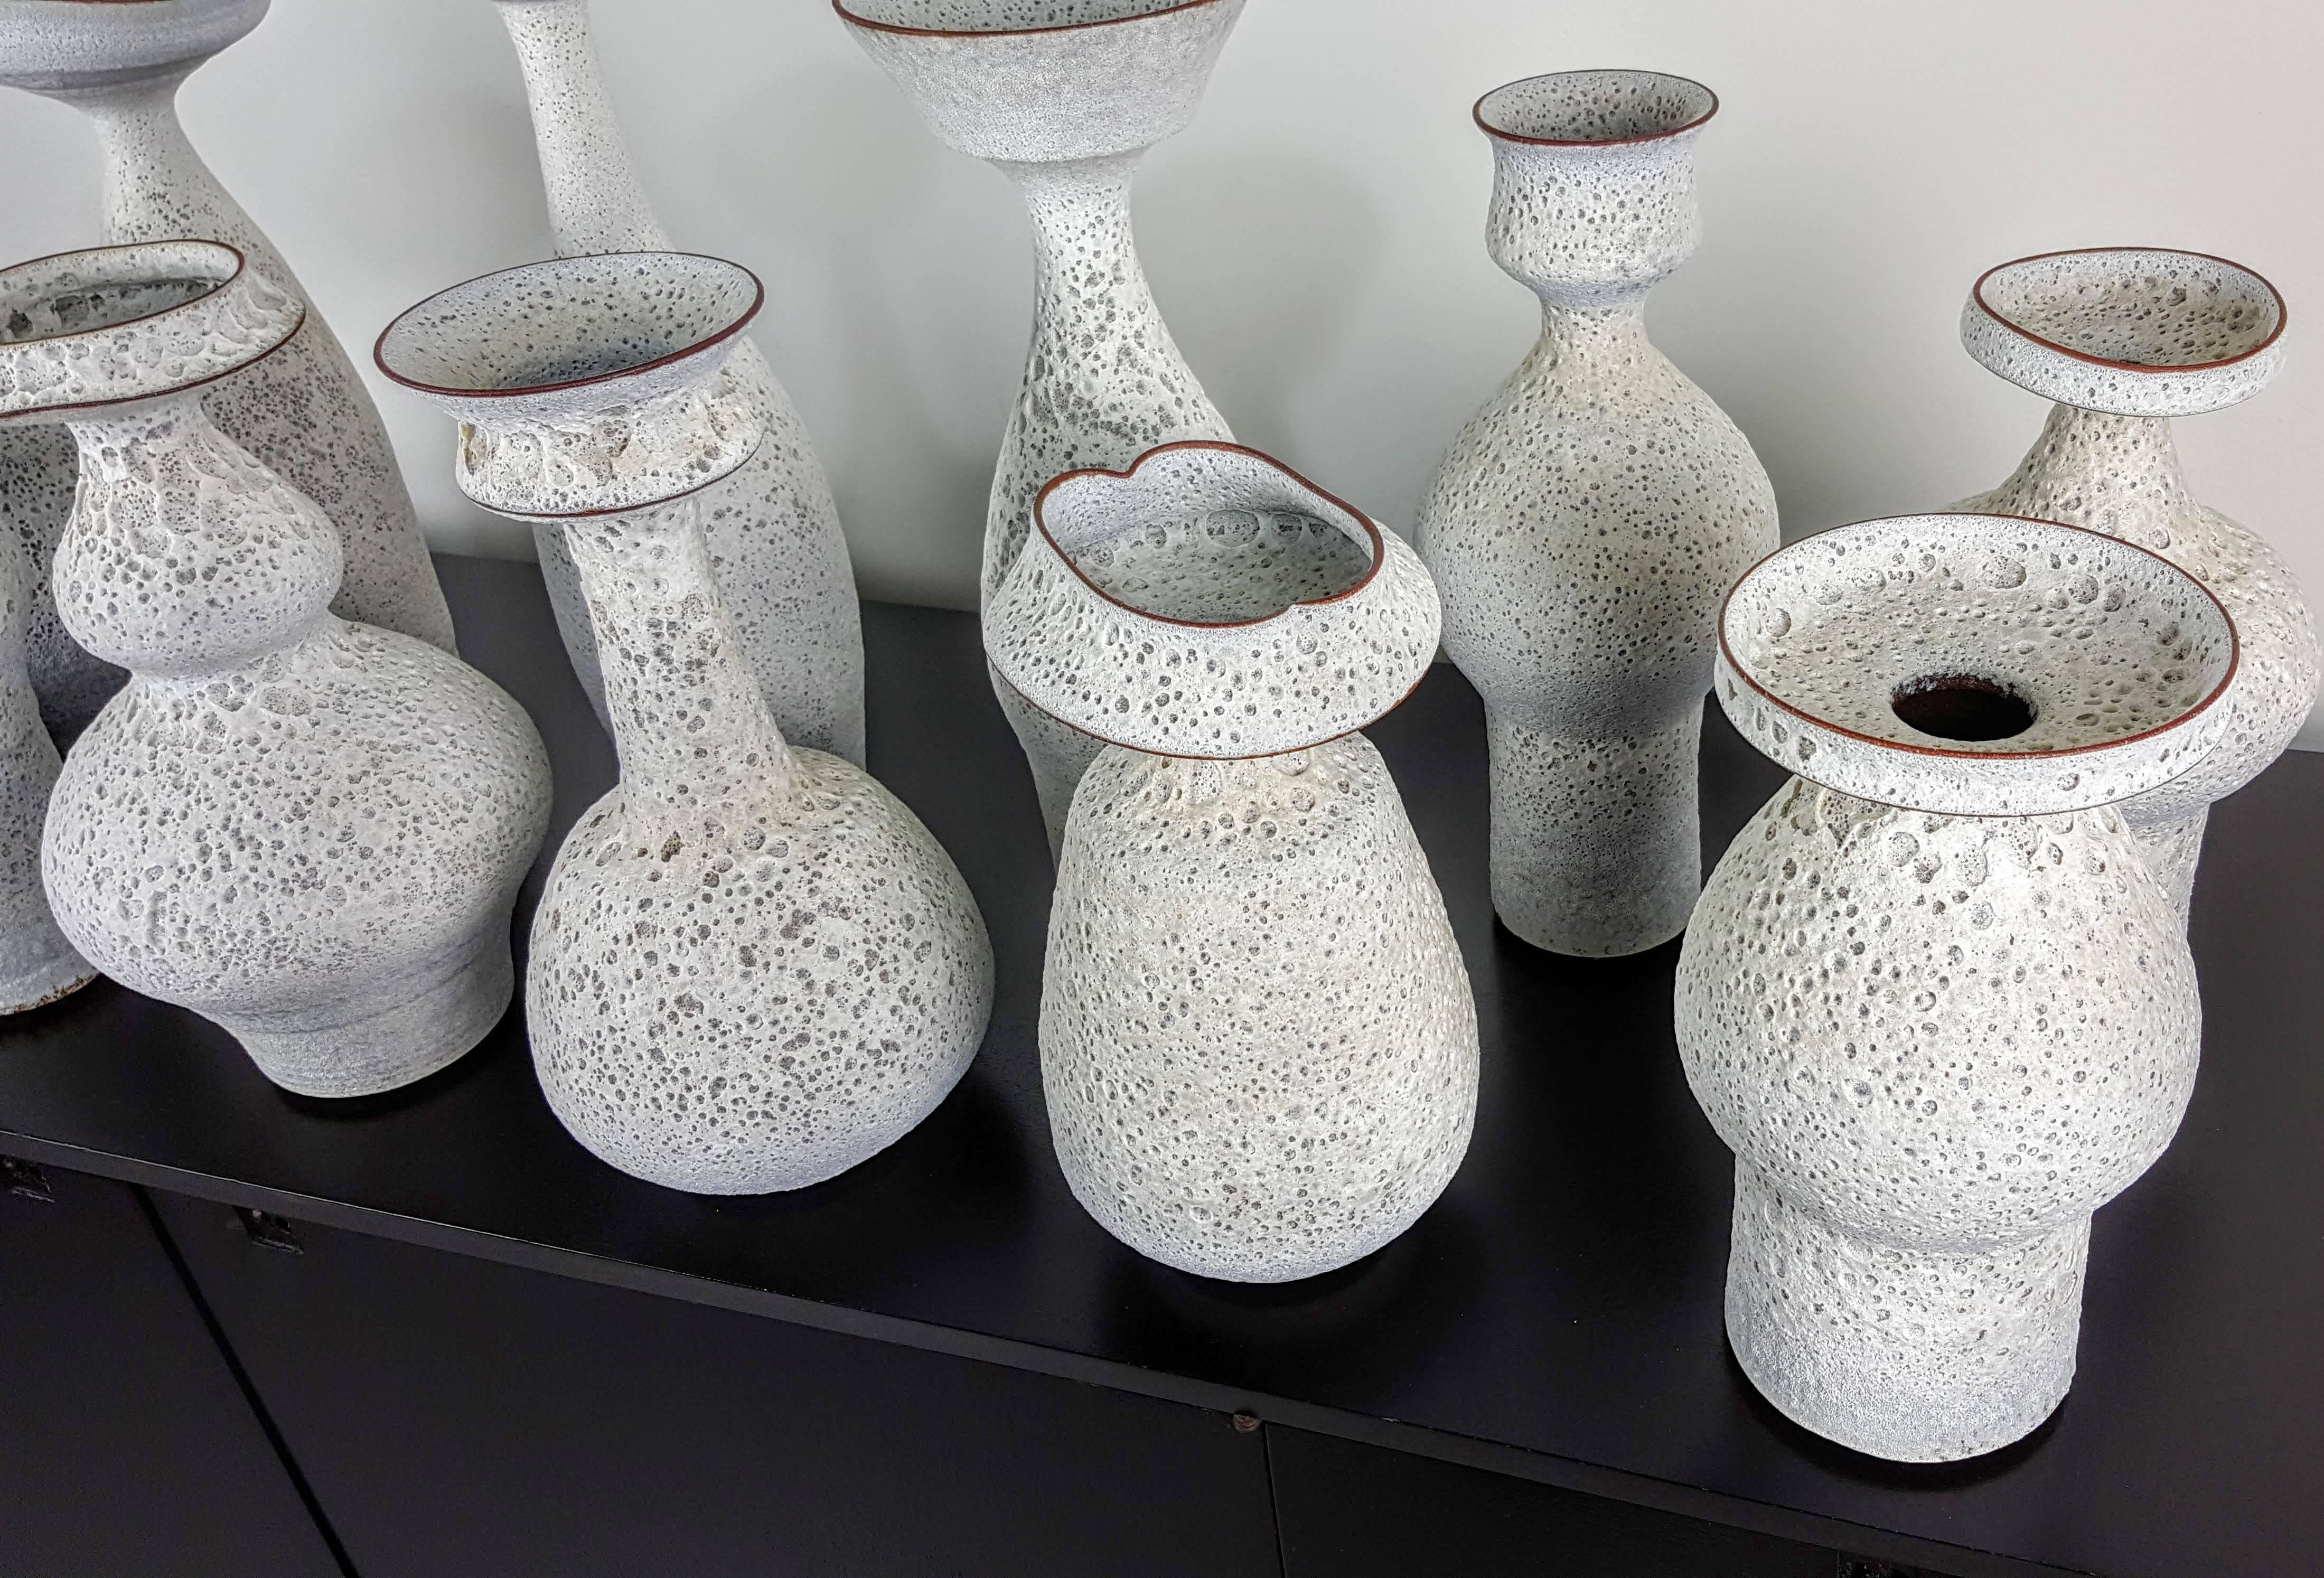 Mid-Century Modern Masterful Studio Pottery Vases in a White Crater Glaze by Jeremy Briddell, 2015